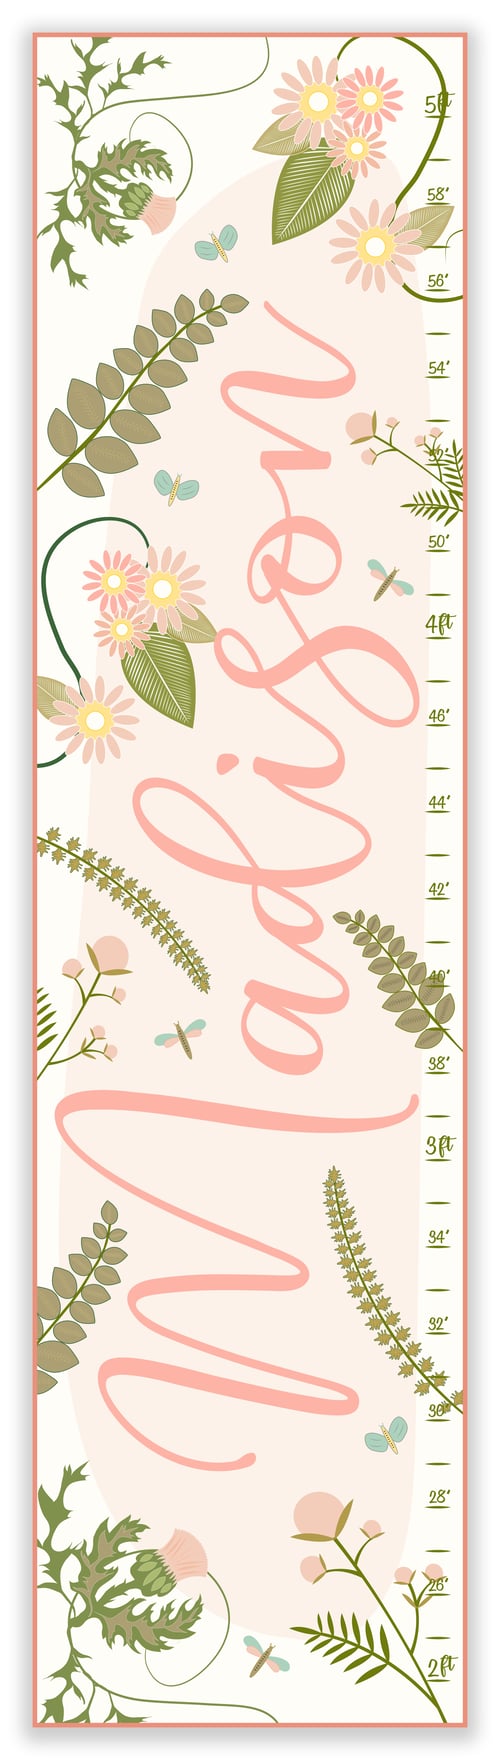 Image of Blush Calligraphy Floral Personalized Canvas Growth Chart